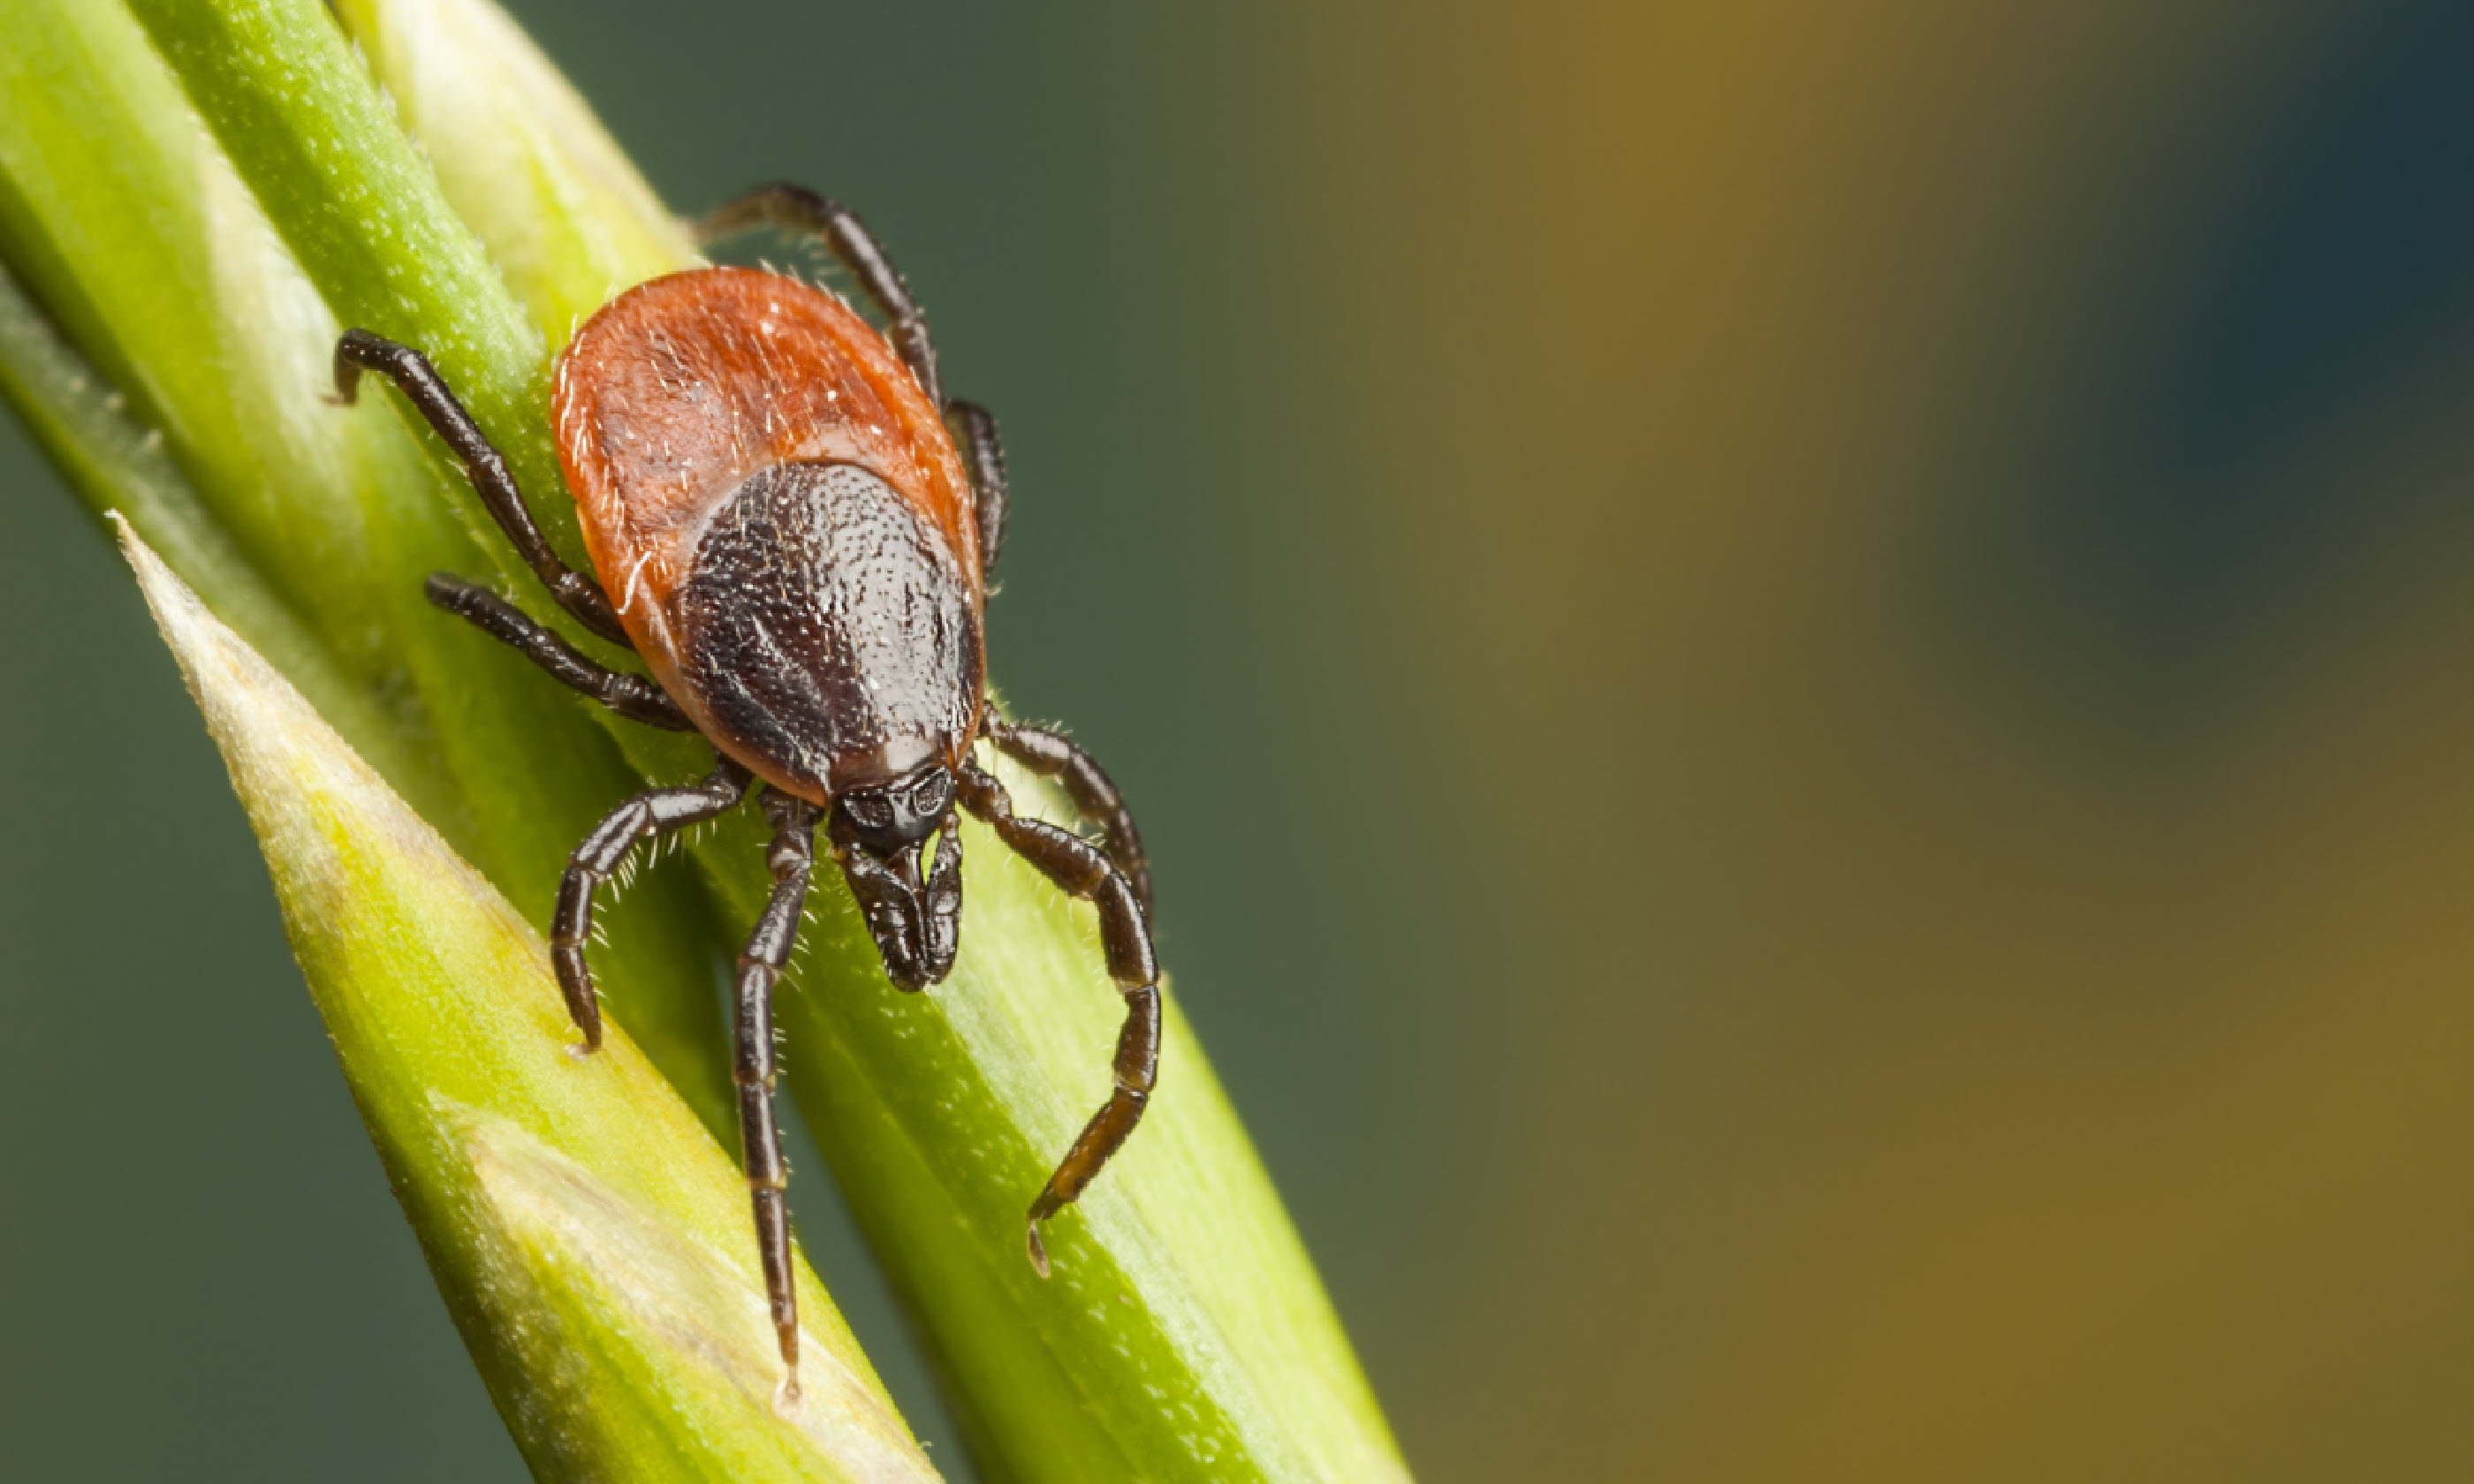 Closeup of a tick on a plant straw (Shutterstock: see credit below)